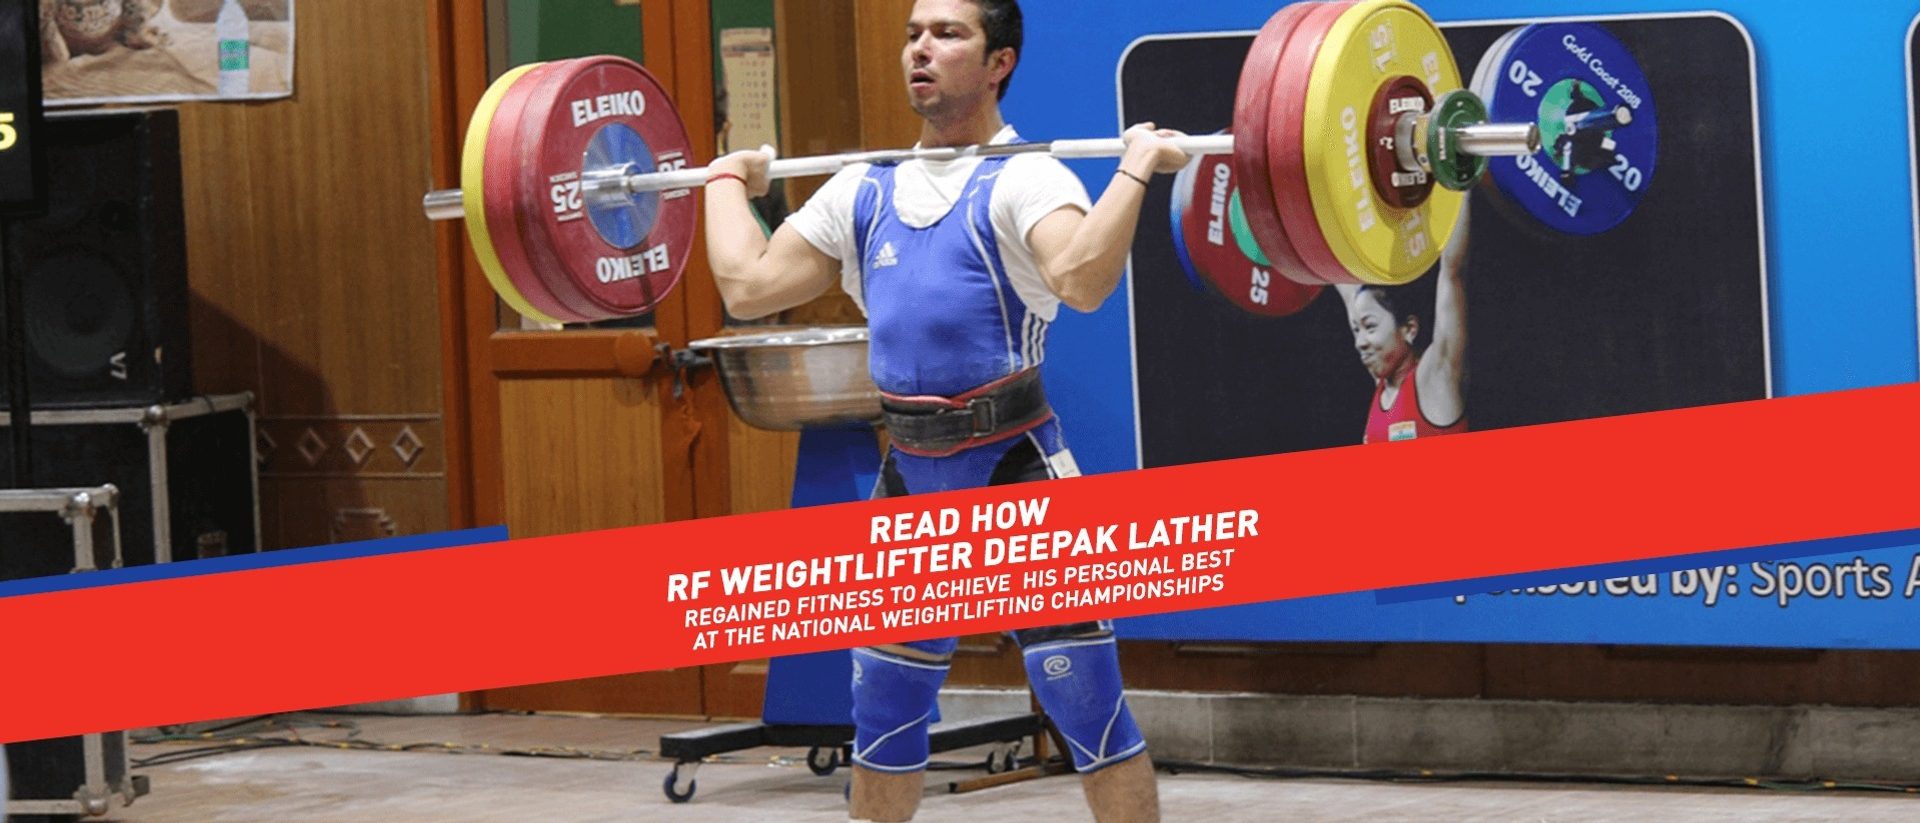 WITH RELIANCE FOUNDATION IN HIS CORNER, 21 YEAR OLD WEIGHTLIFTER DEEPAK LATHER PRIMED FOR GREATER HEIGHTS